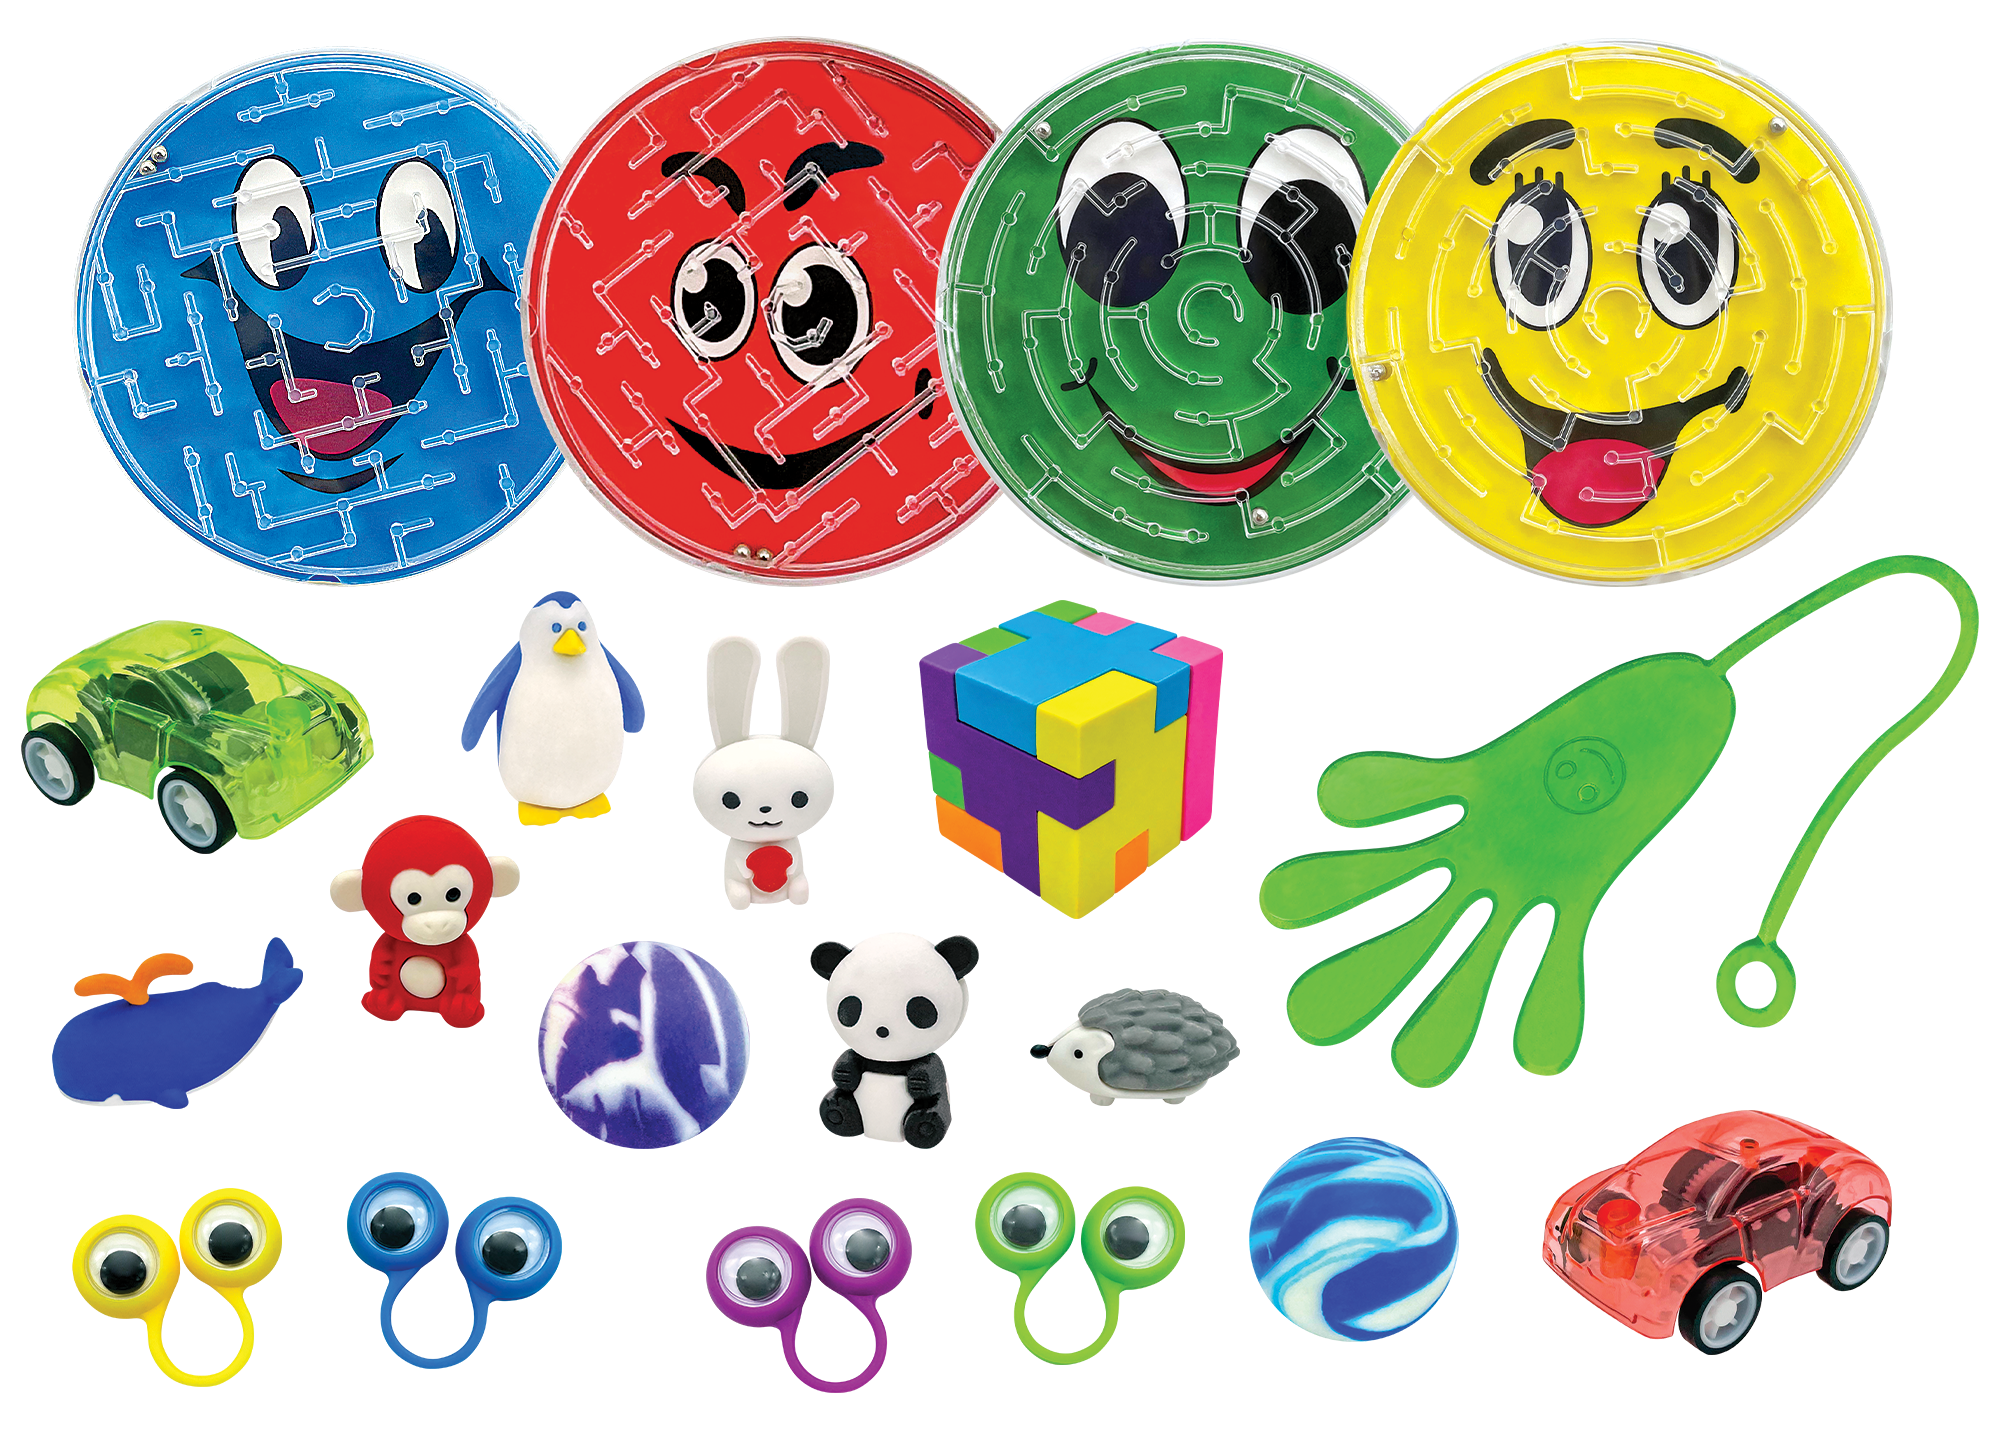 Includes 34 total pieces: 6 - Eraser Desk Pets, 1 - Eraser Puzzle, 5 - Pull and Release Cars, 6 - Finger Eyes, 8 - Super Bouncy Balls, 4 - Ball Mazes, 4 - Stretchy Hands